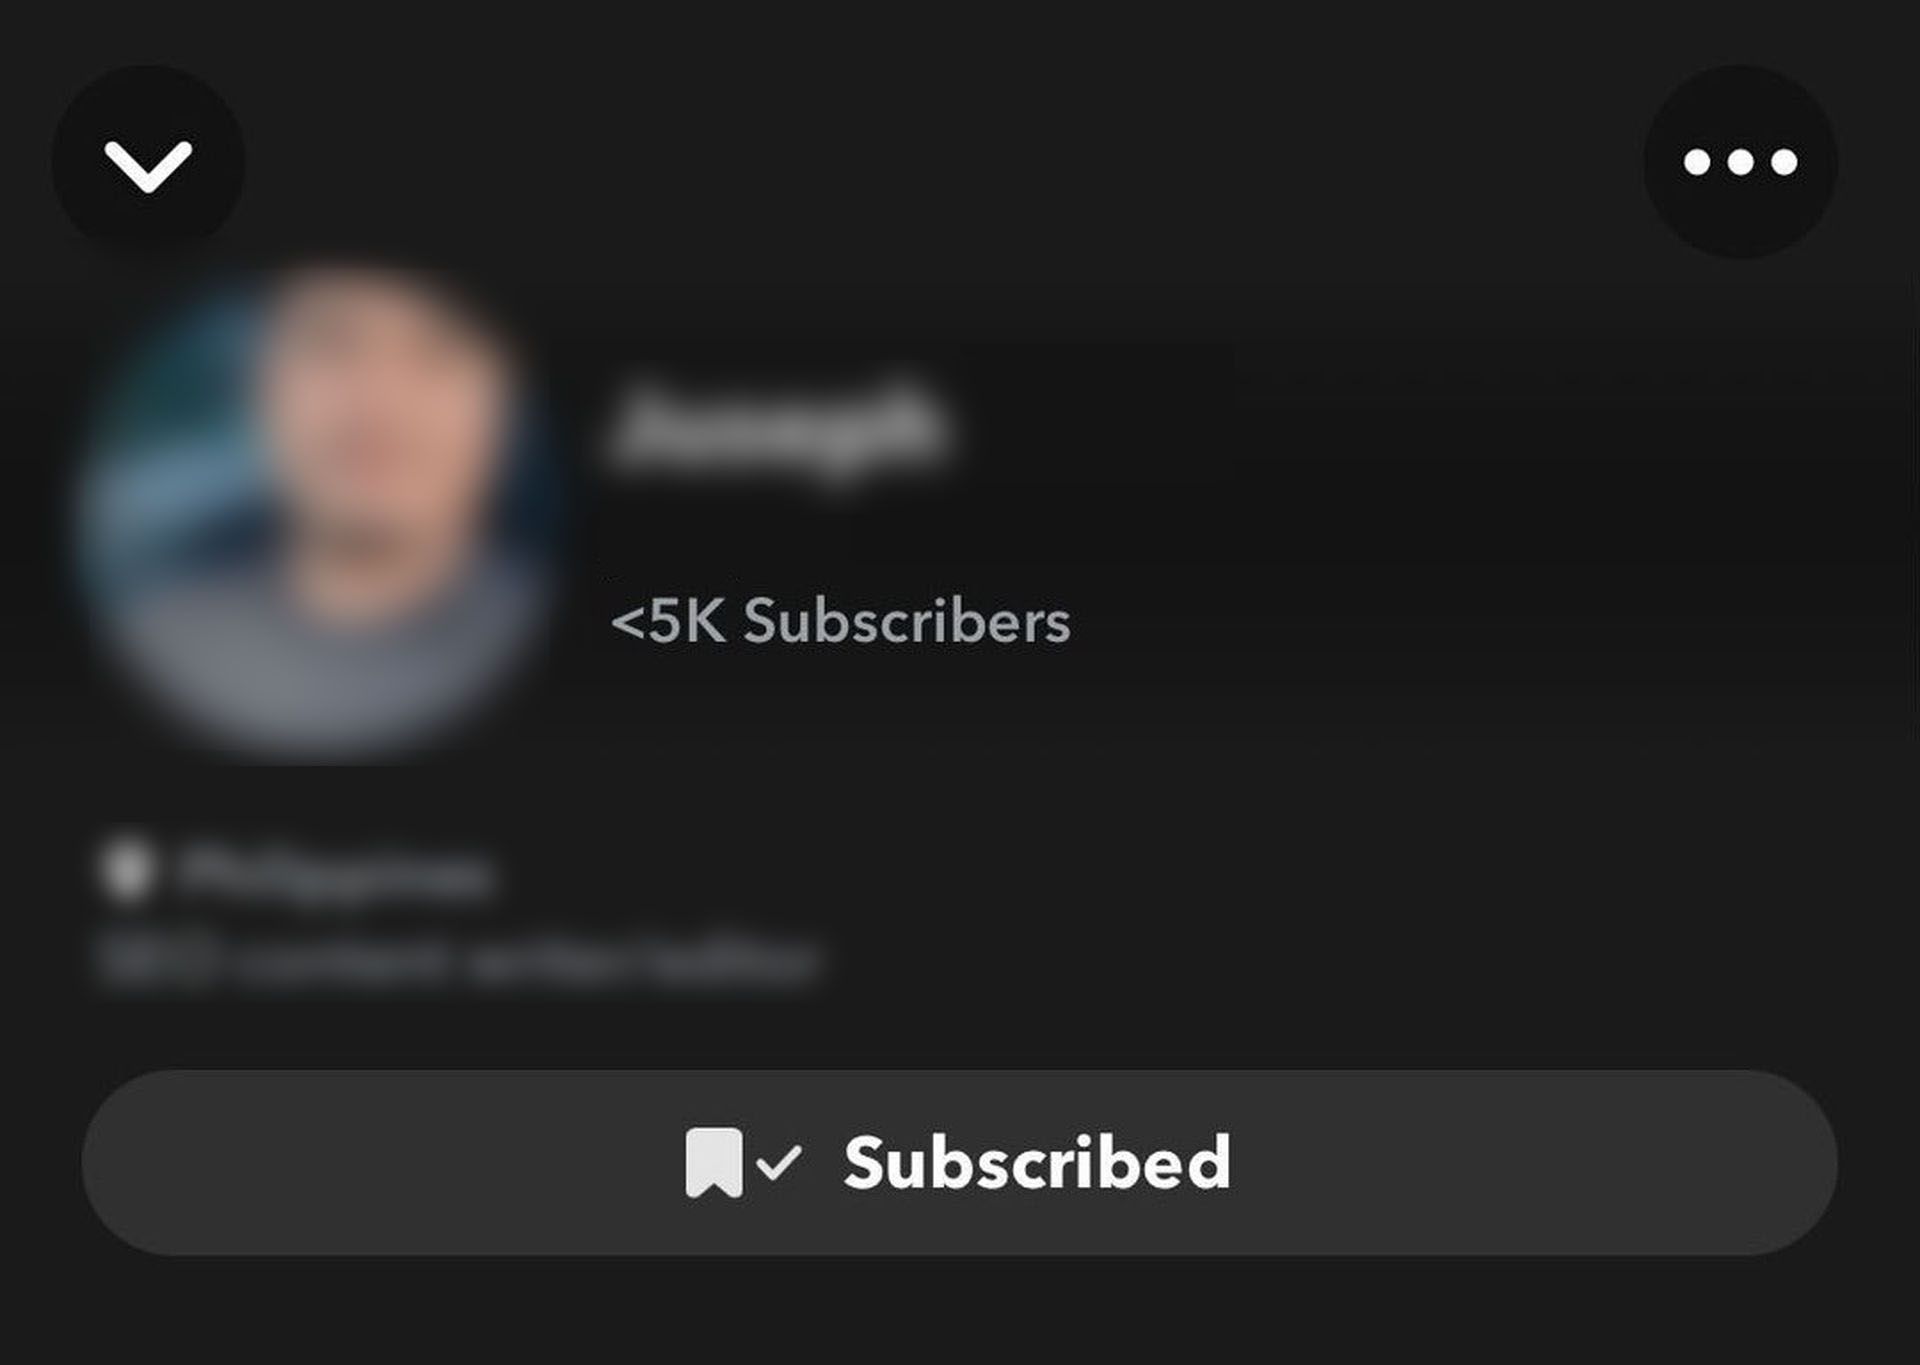 What does 5k subscribers mean on Snapchat